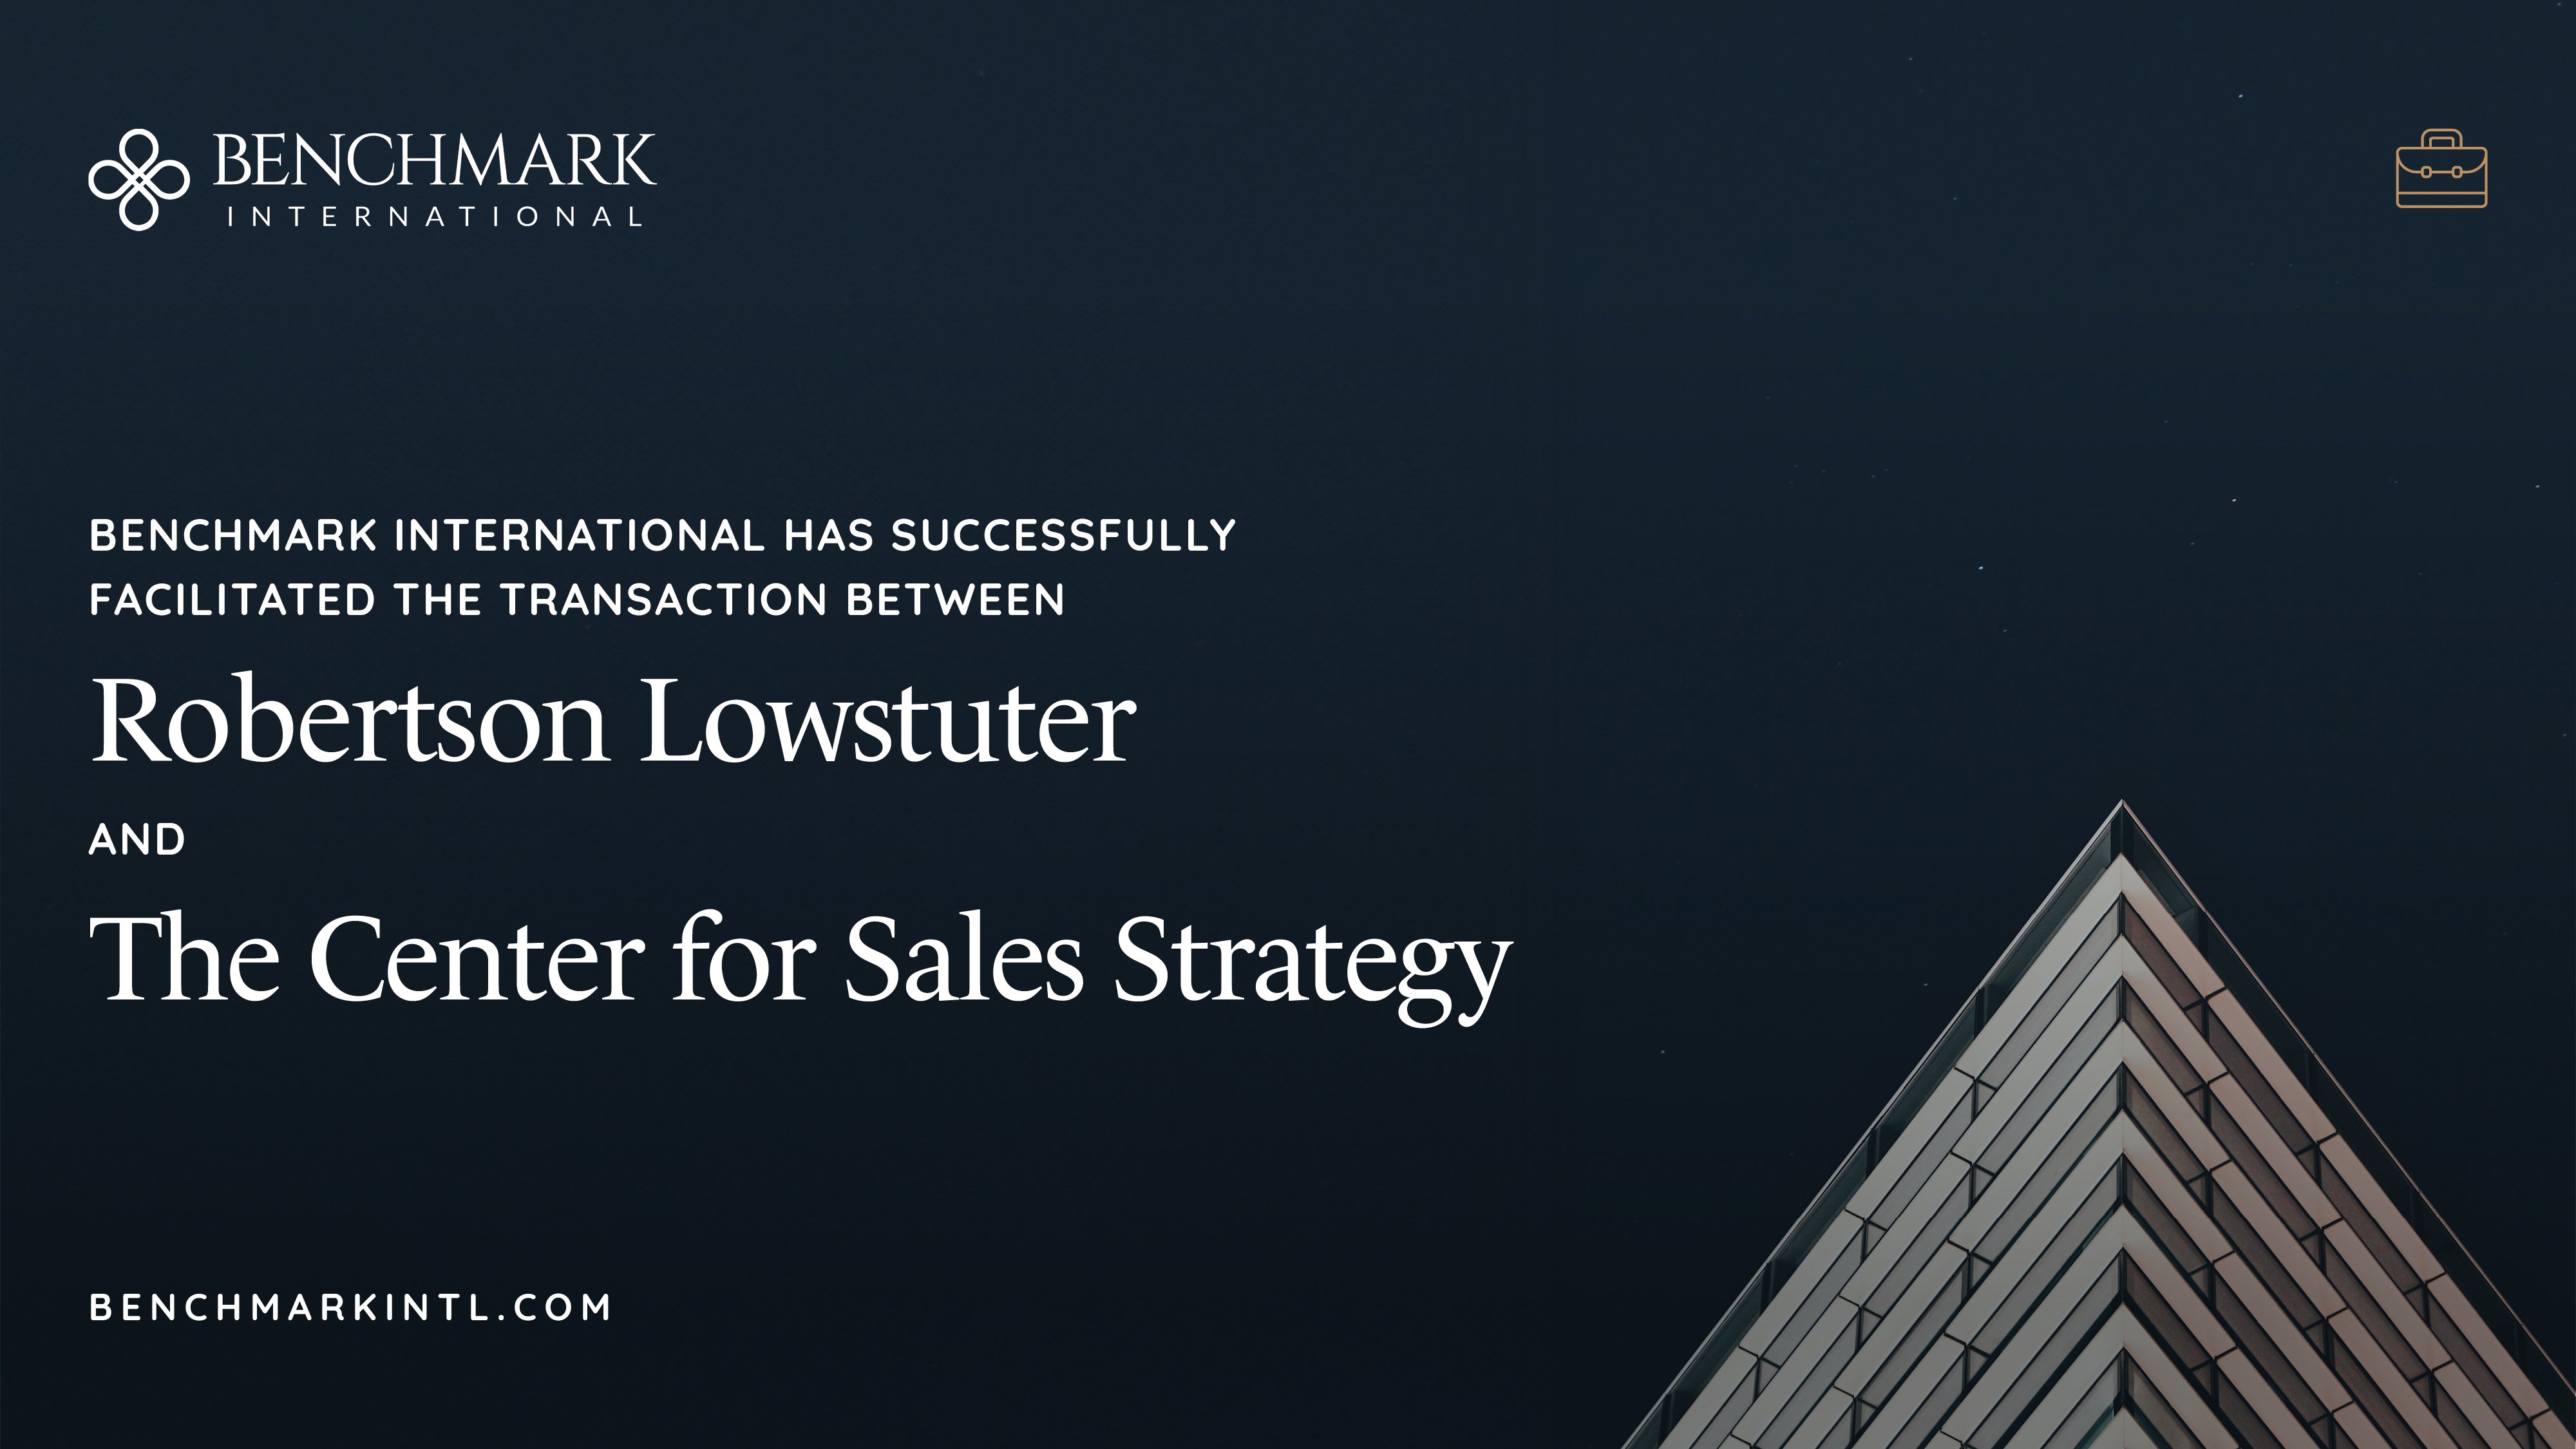 Benchmark International Successfully Facilitated The Transaction Between Robertson Lowstuter And The Center For Sales Strategy